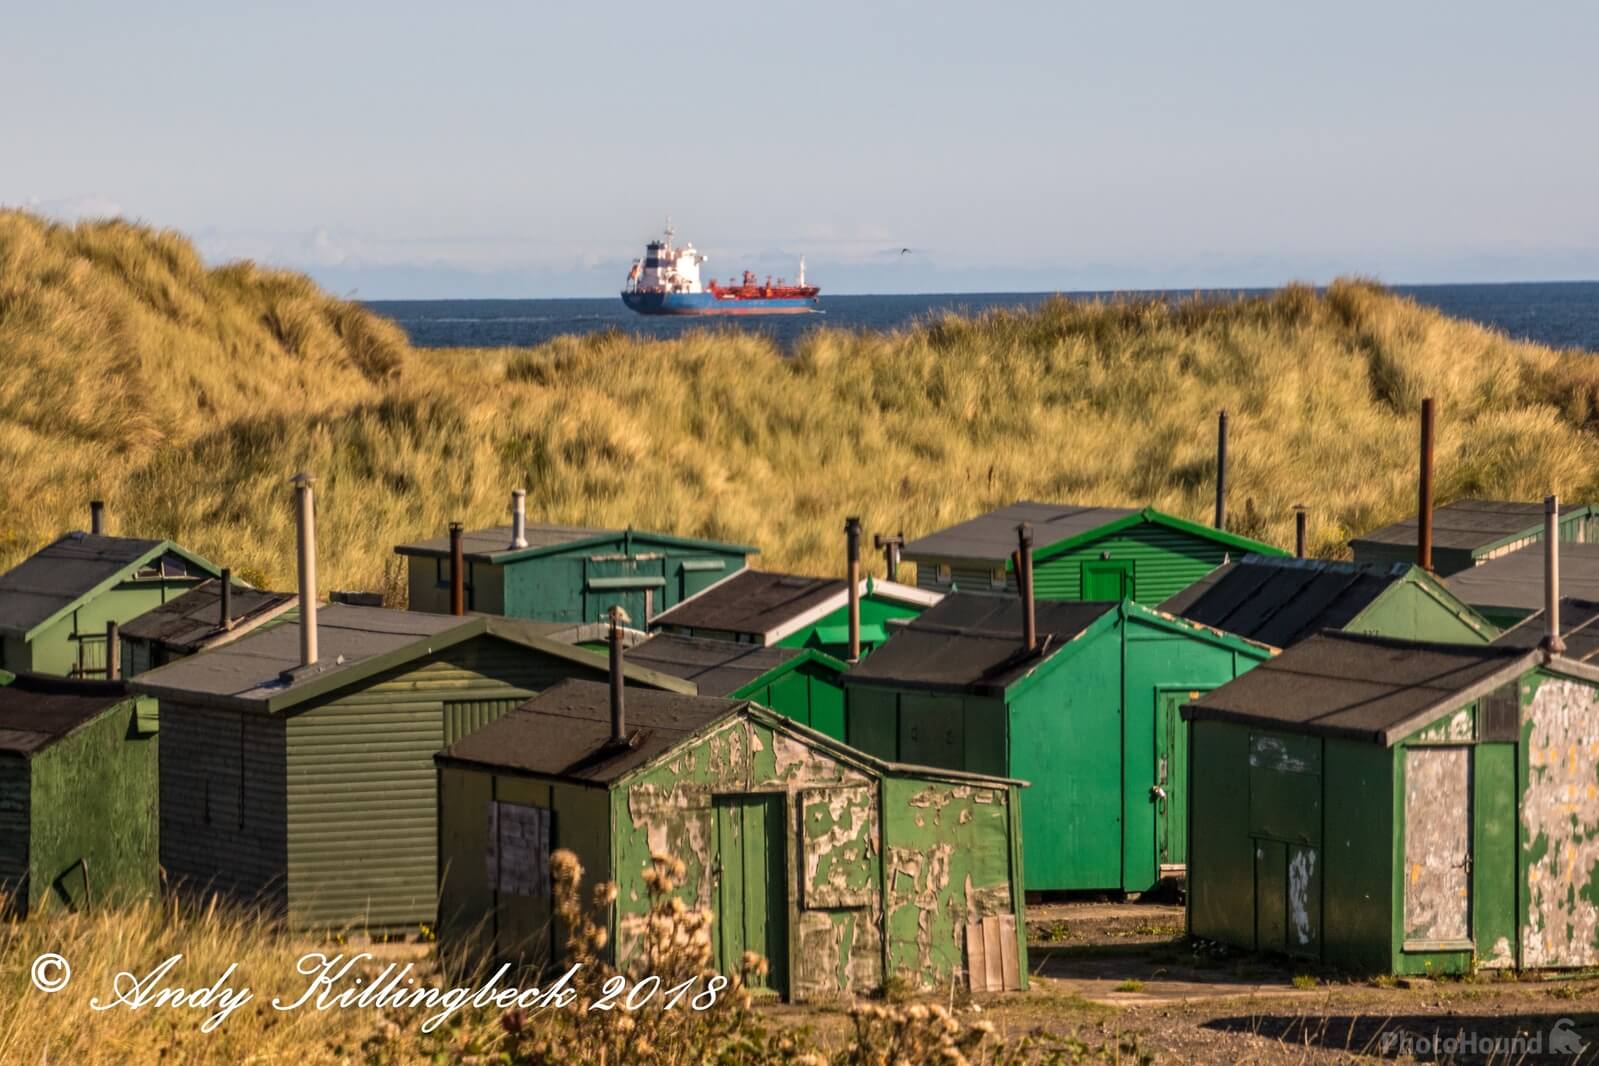 Image of South Gare by Andy Killingbeck